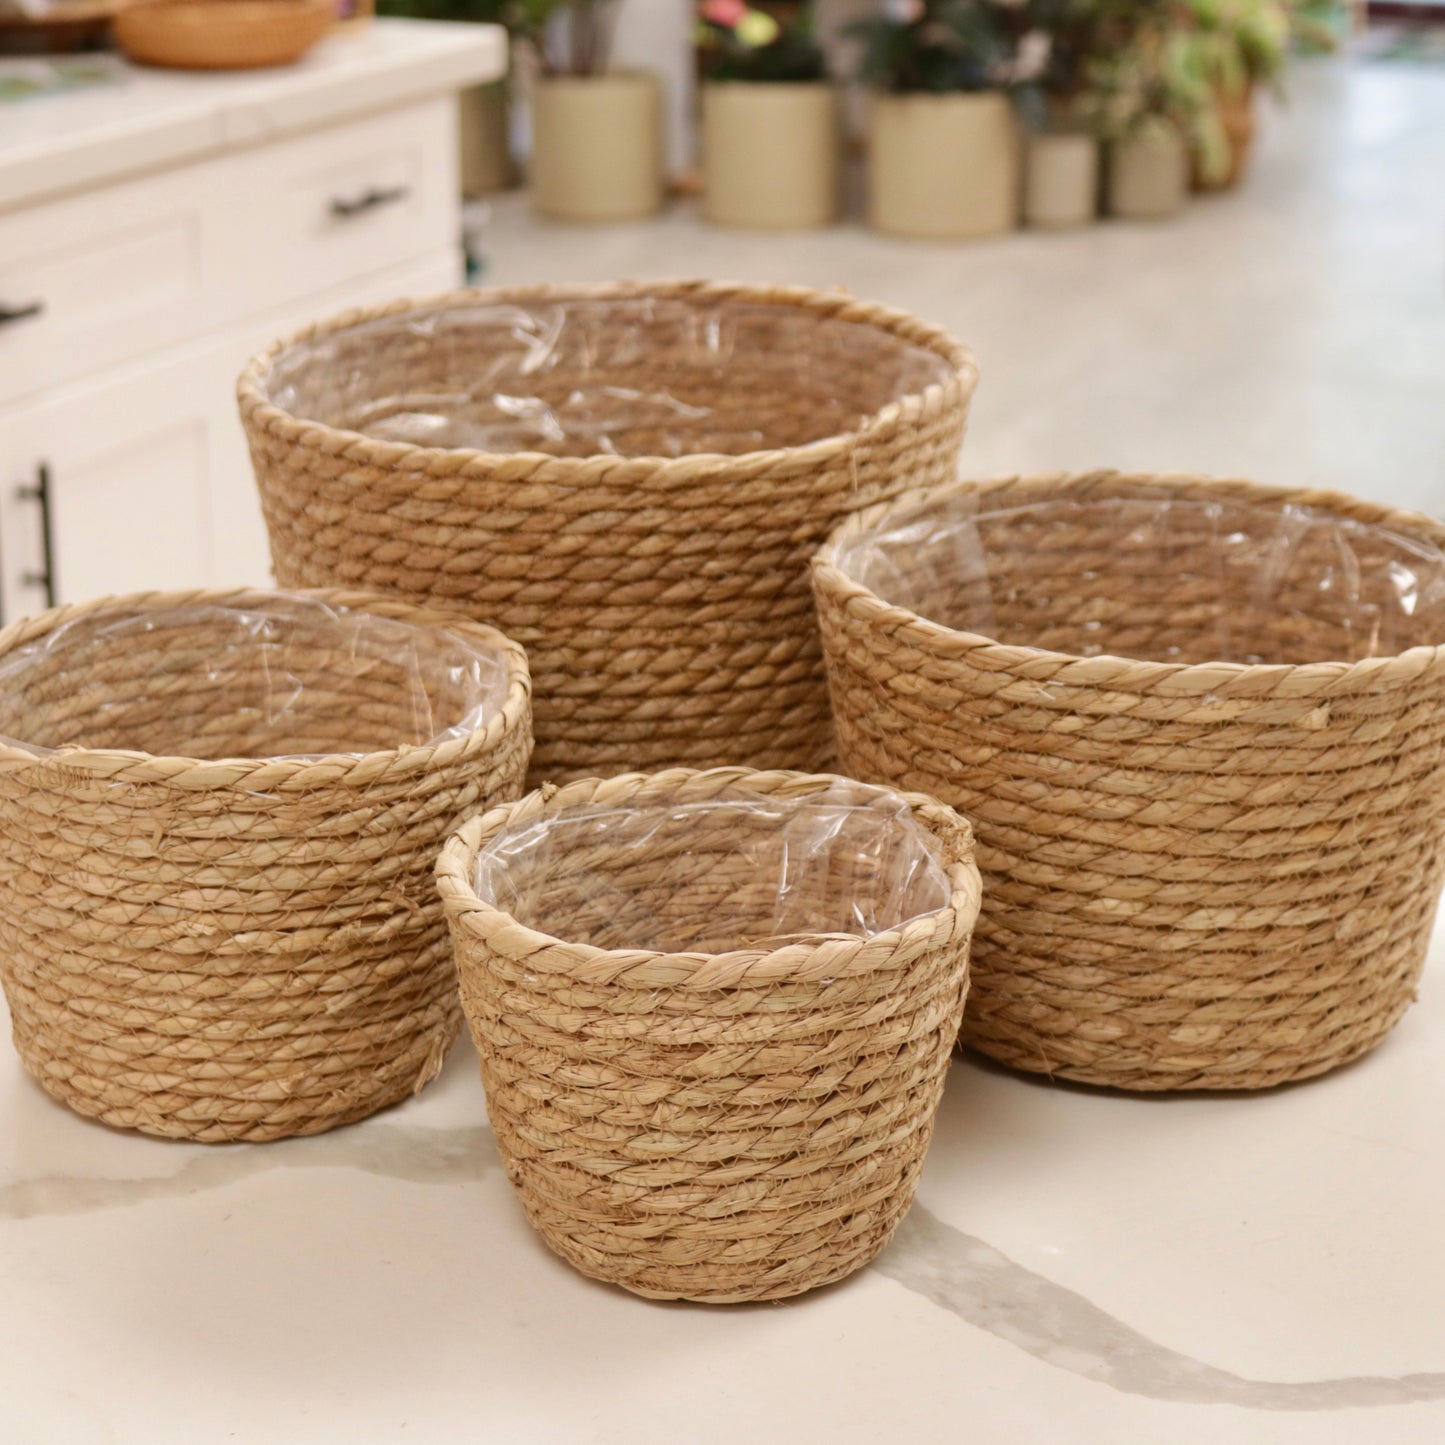 Woven Seagrass Basket with Liner